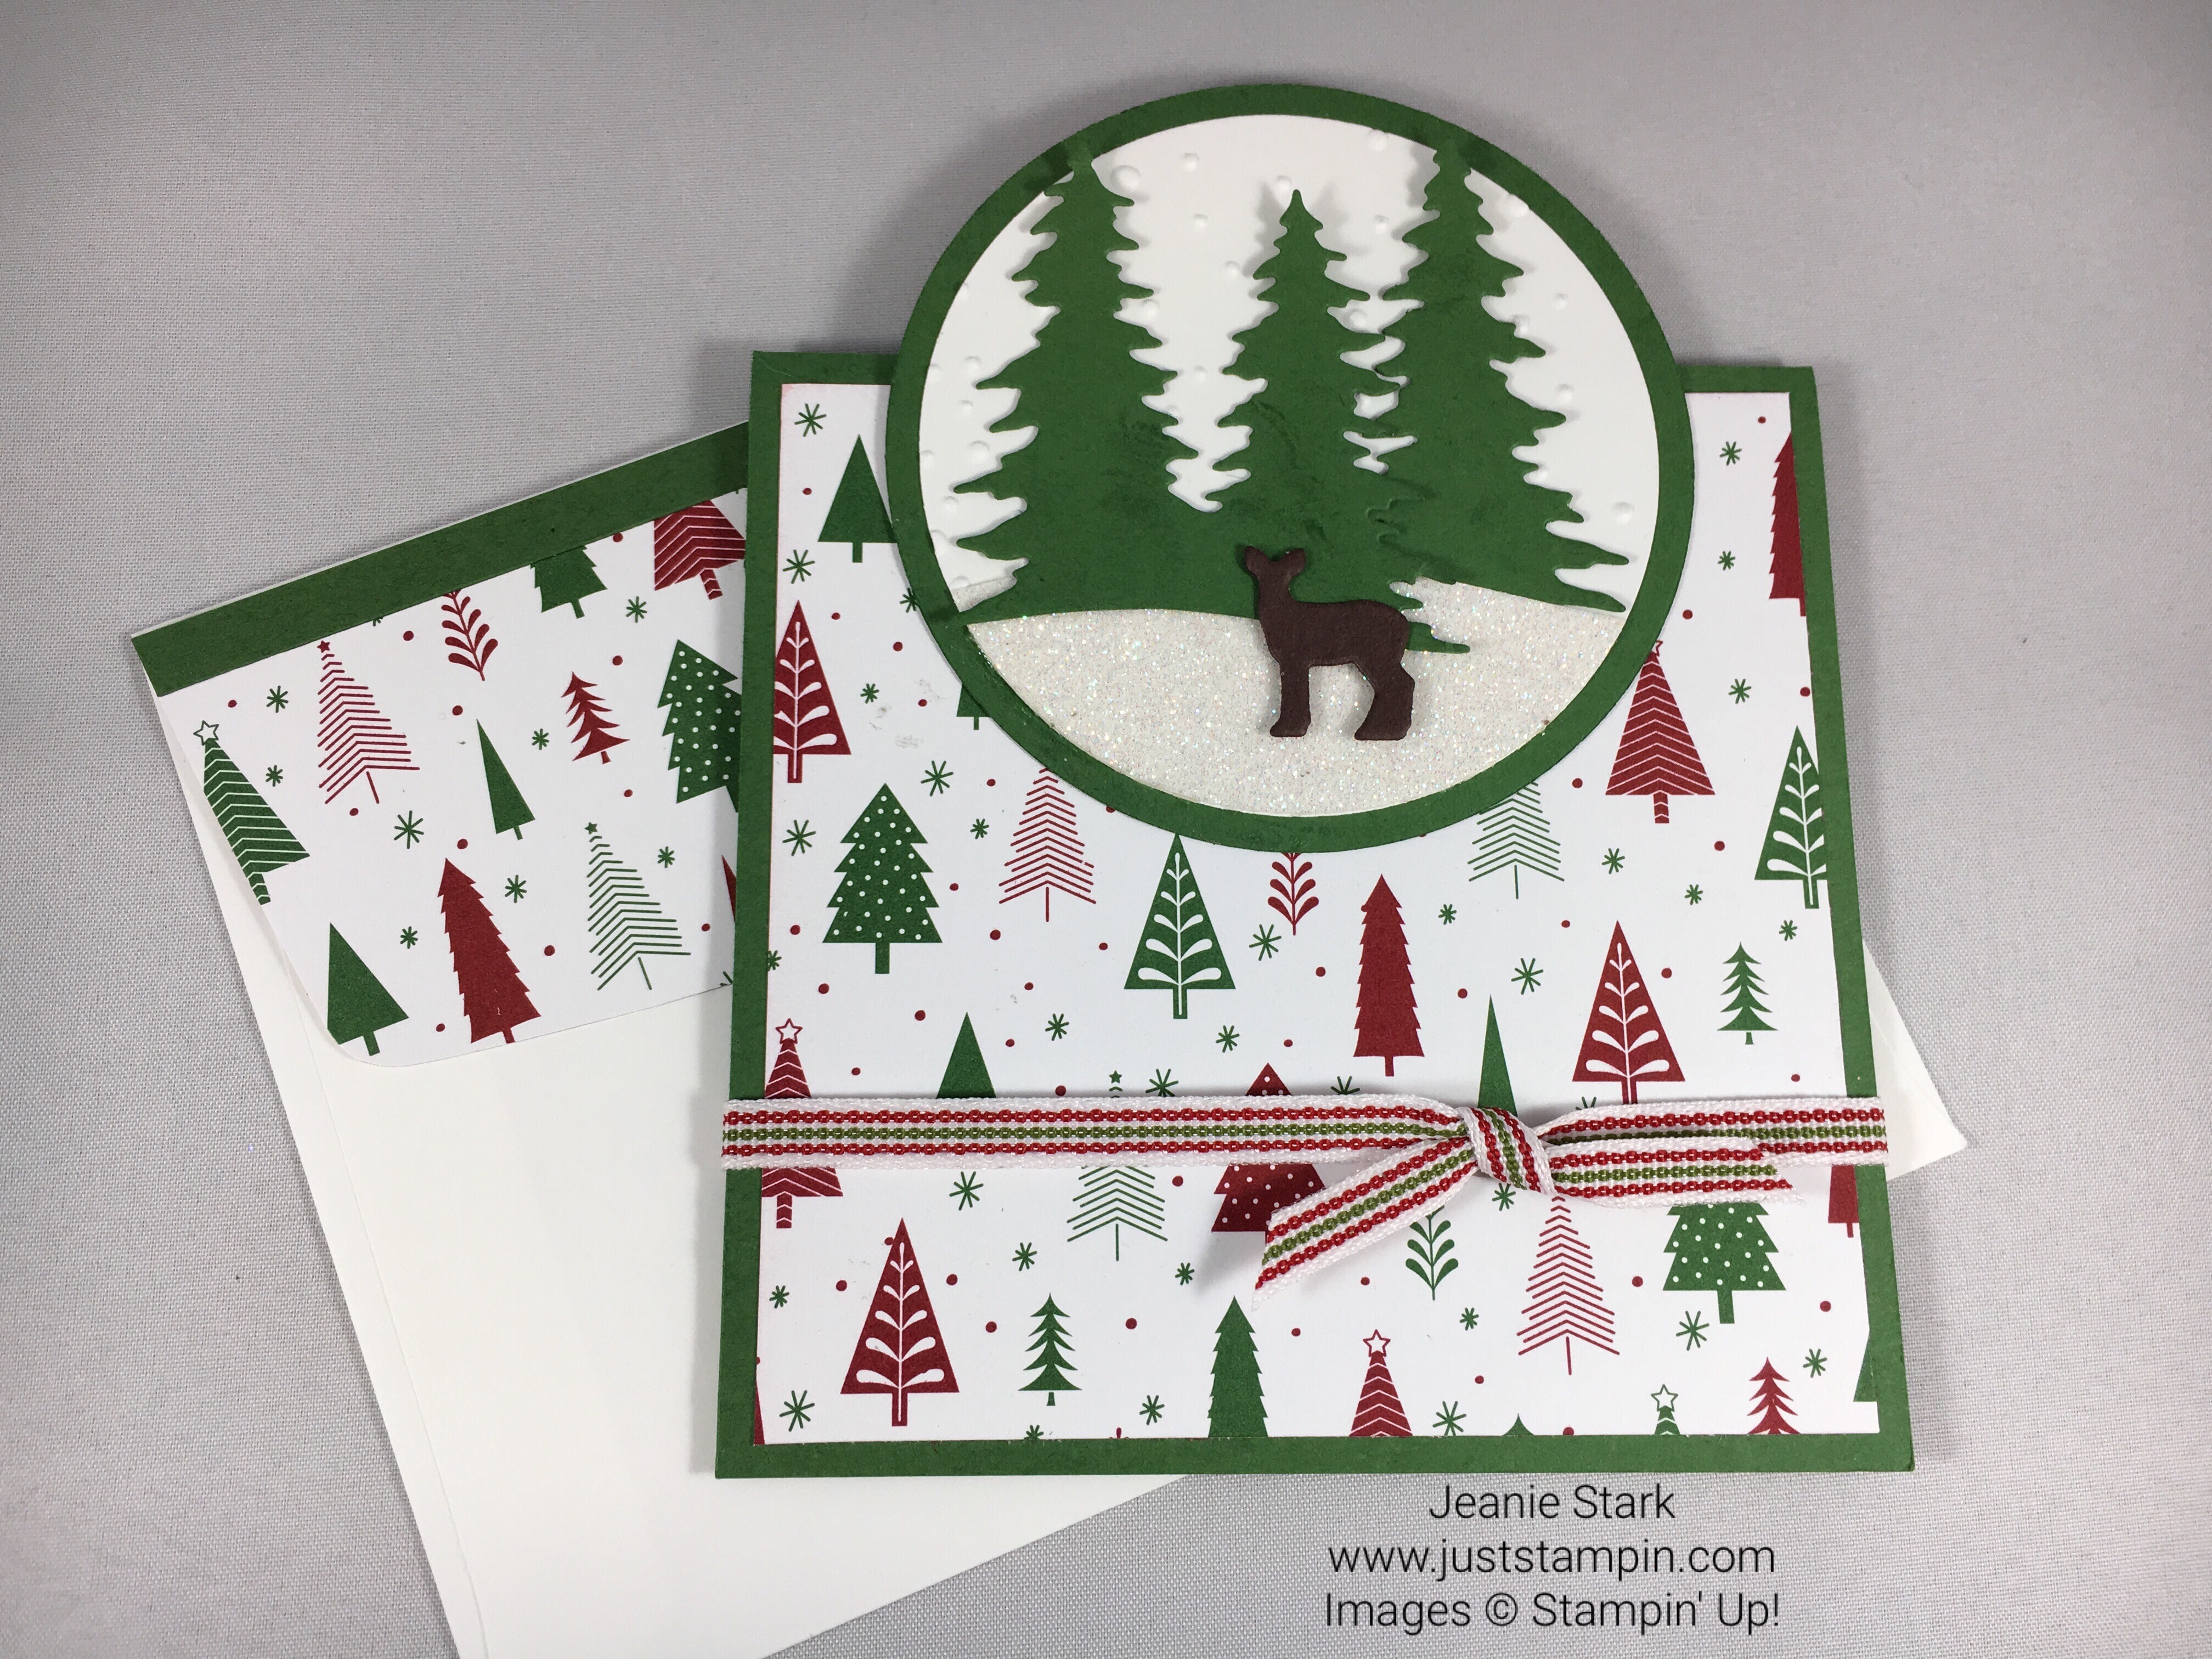 Stampin Up Carols of Christmas Card Idea - Jeanie Stark StampinUp